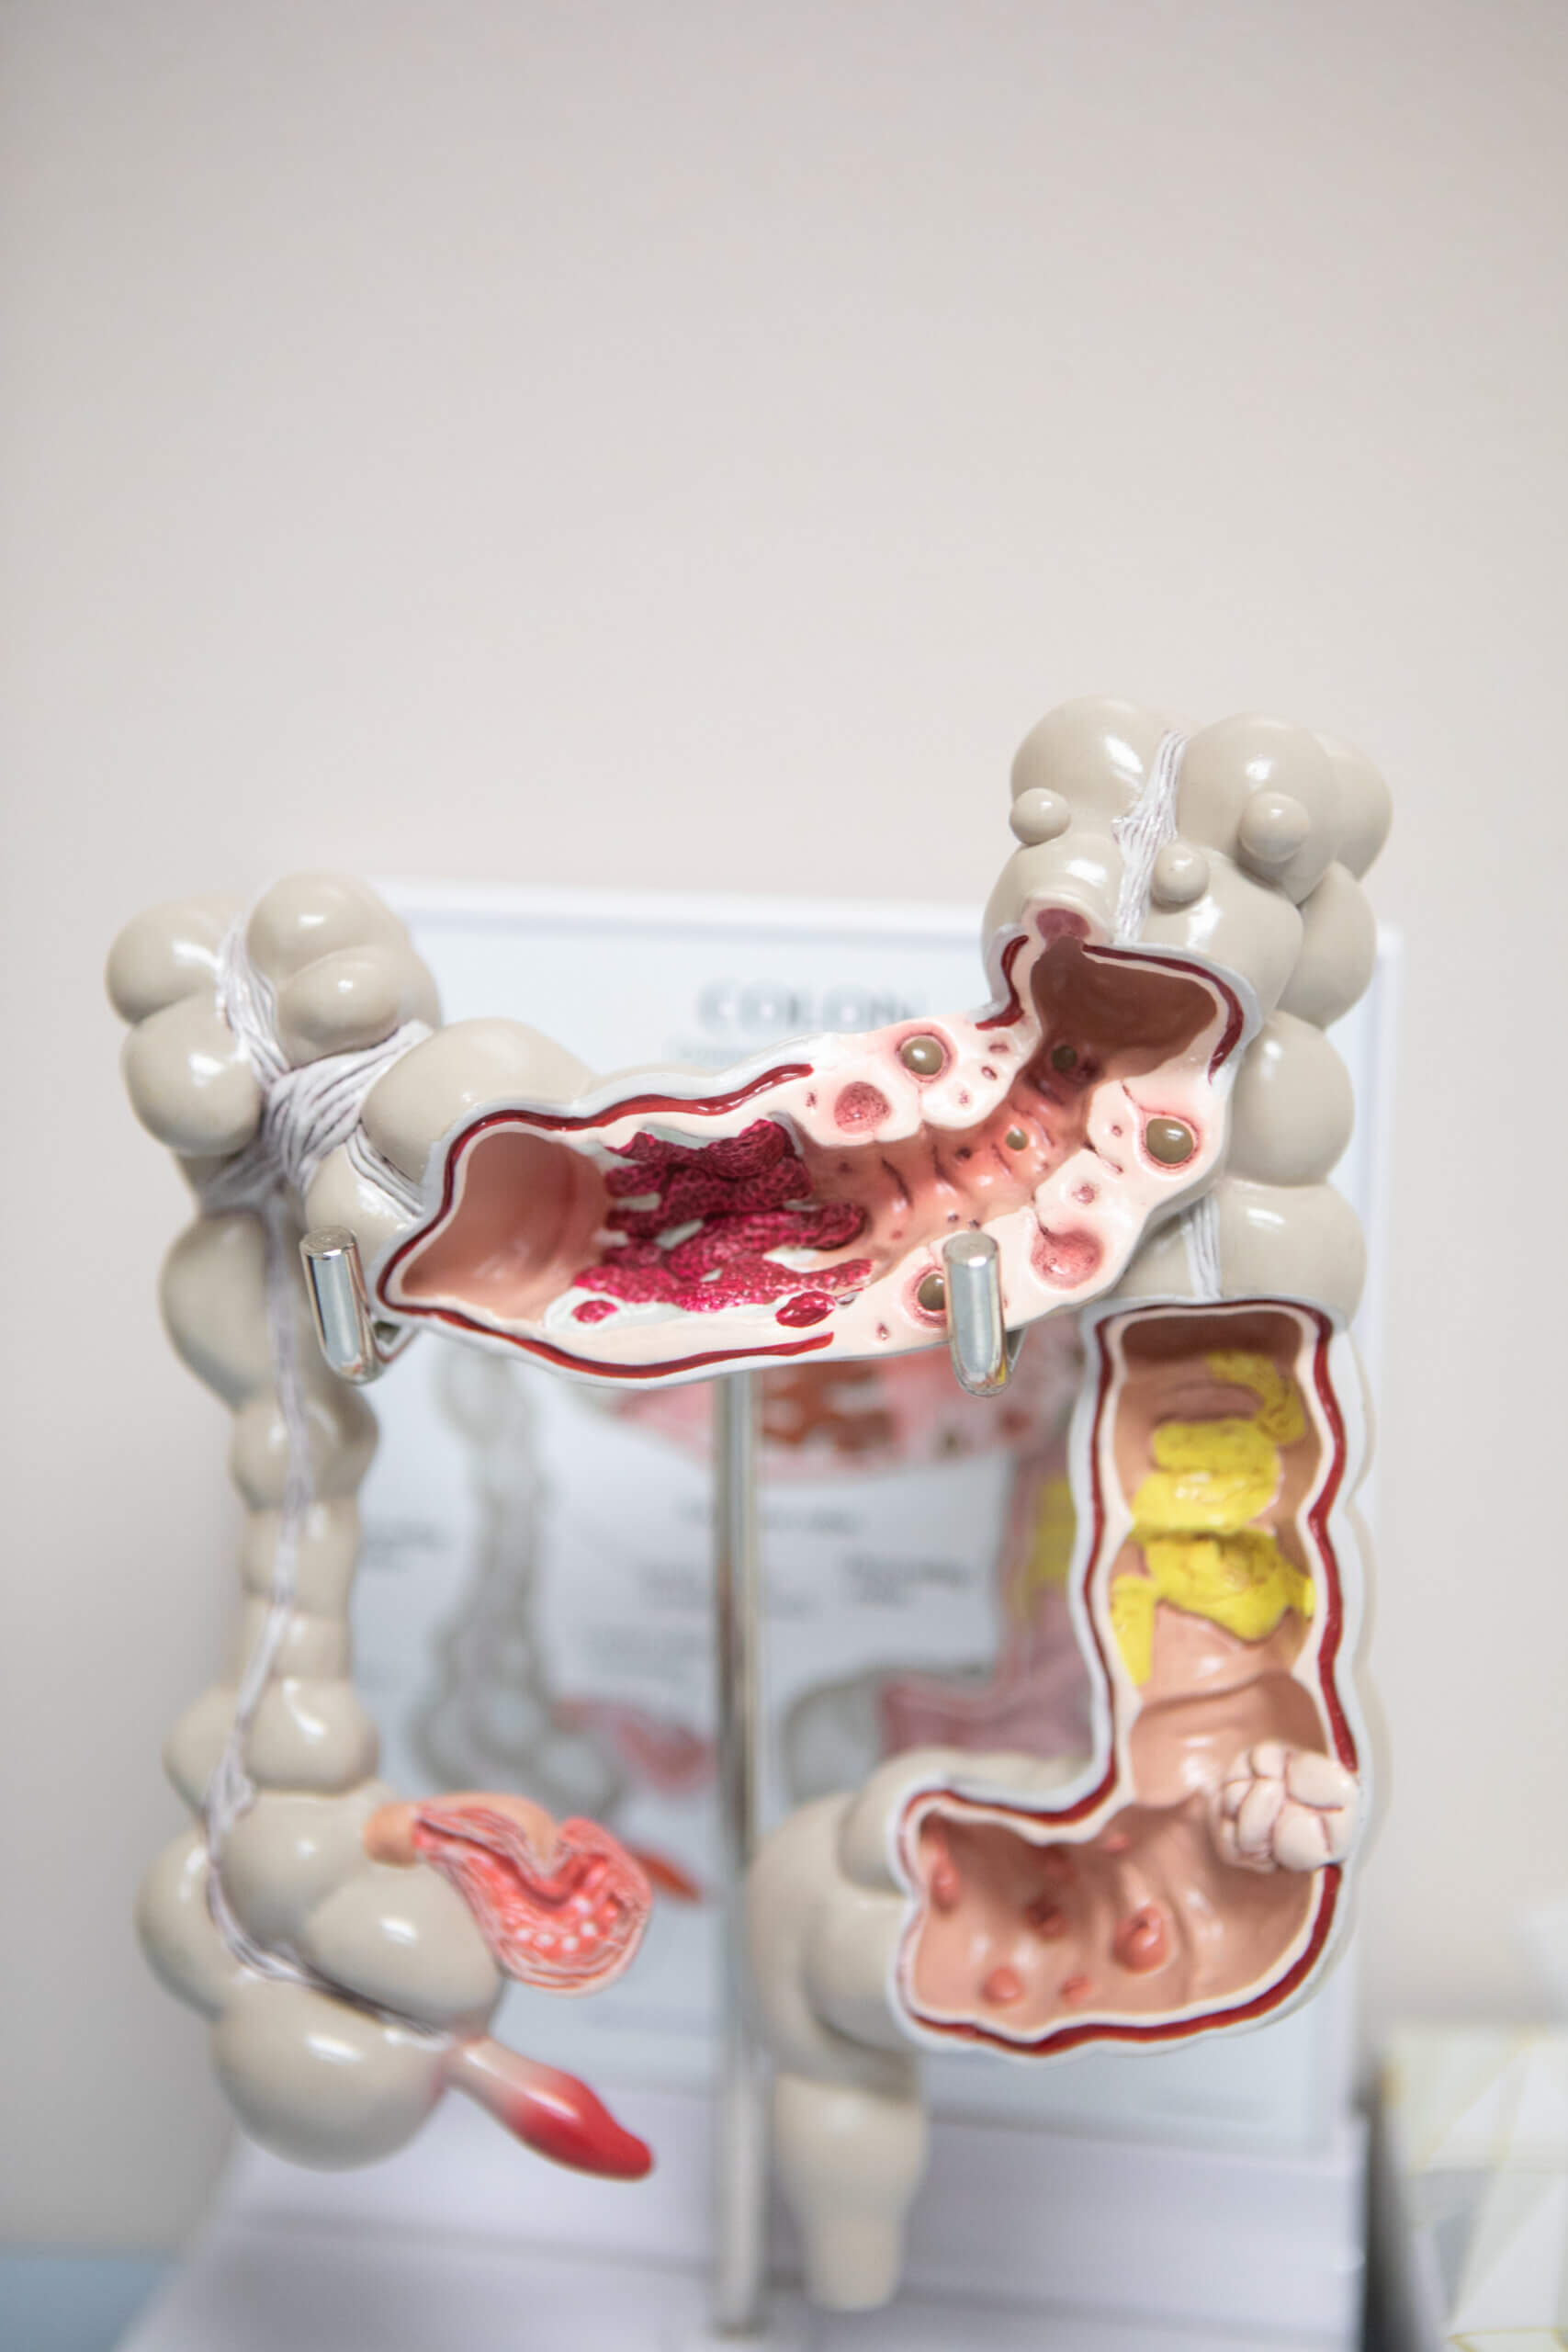 A plastic model of the digestive system used by gastroenterology specialists to show patients